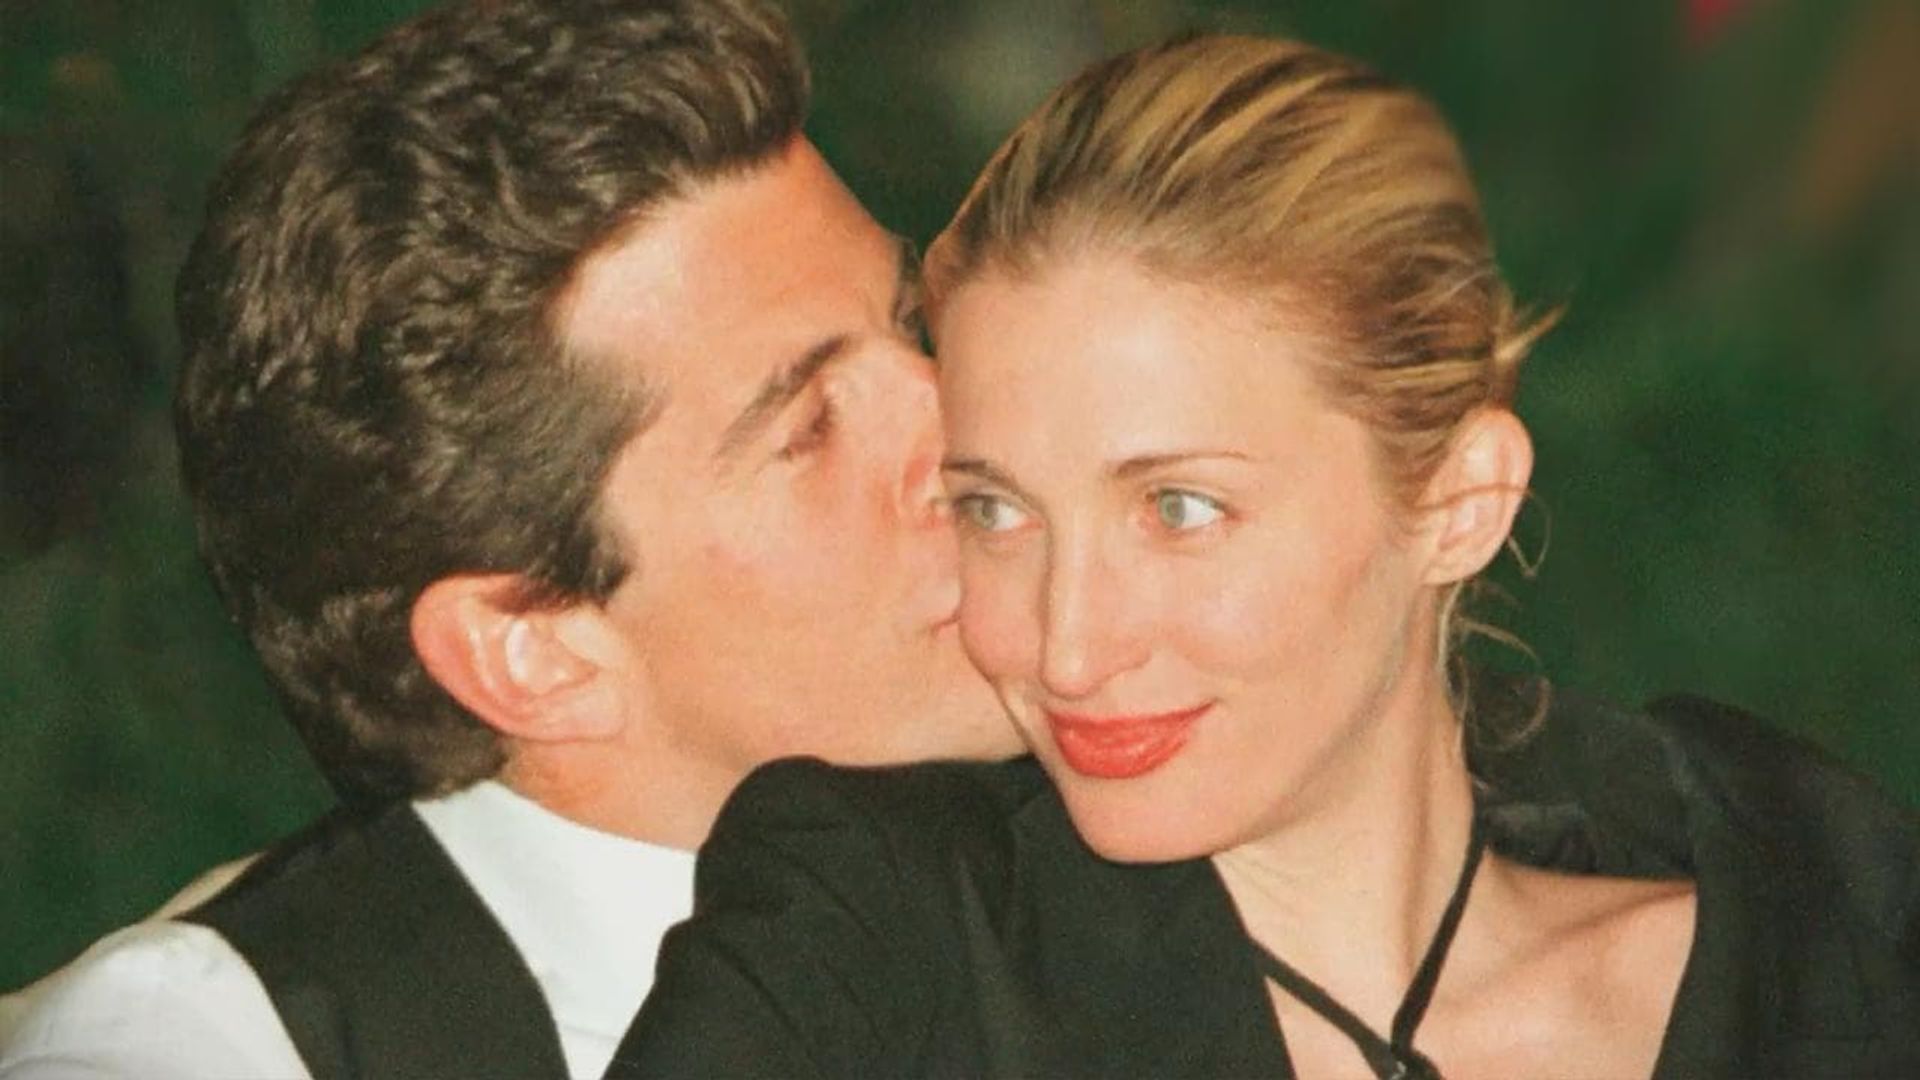 JFK Jr. and Carolyn's Wedding: The Lost Tapes background